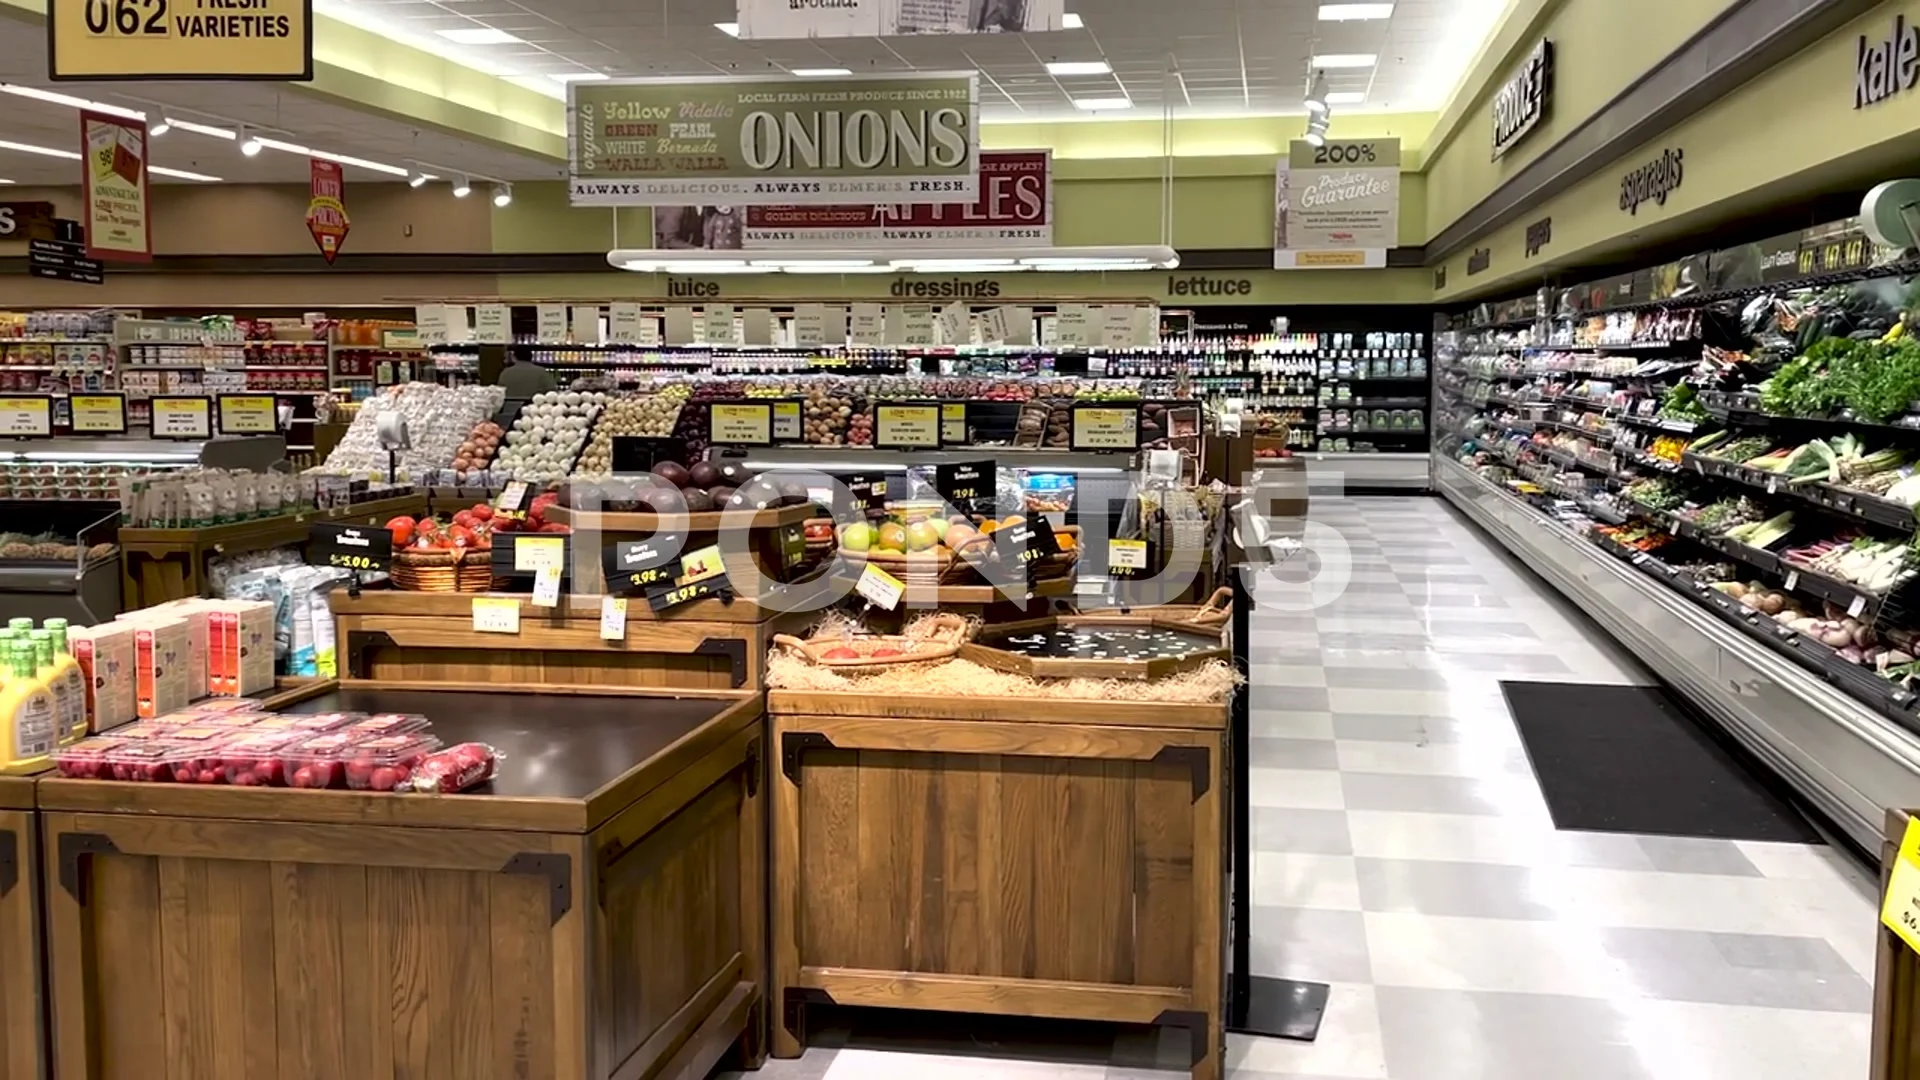 Ingles Markets - Scenes from opening day at the new